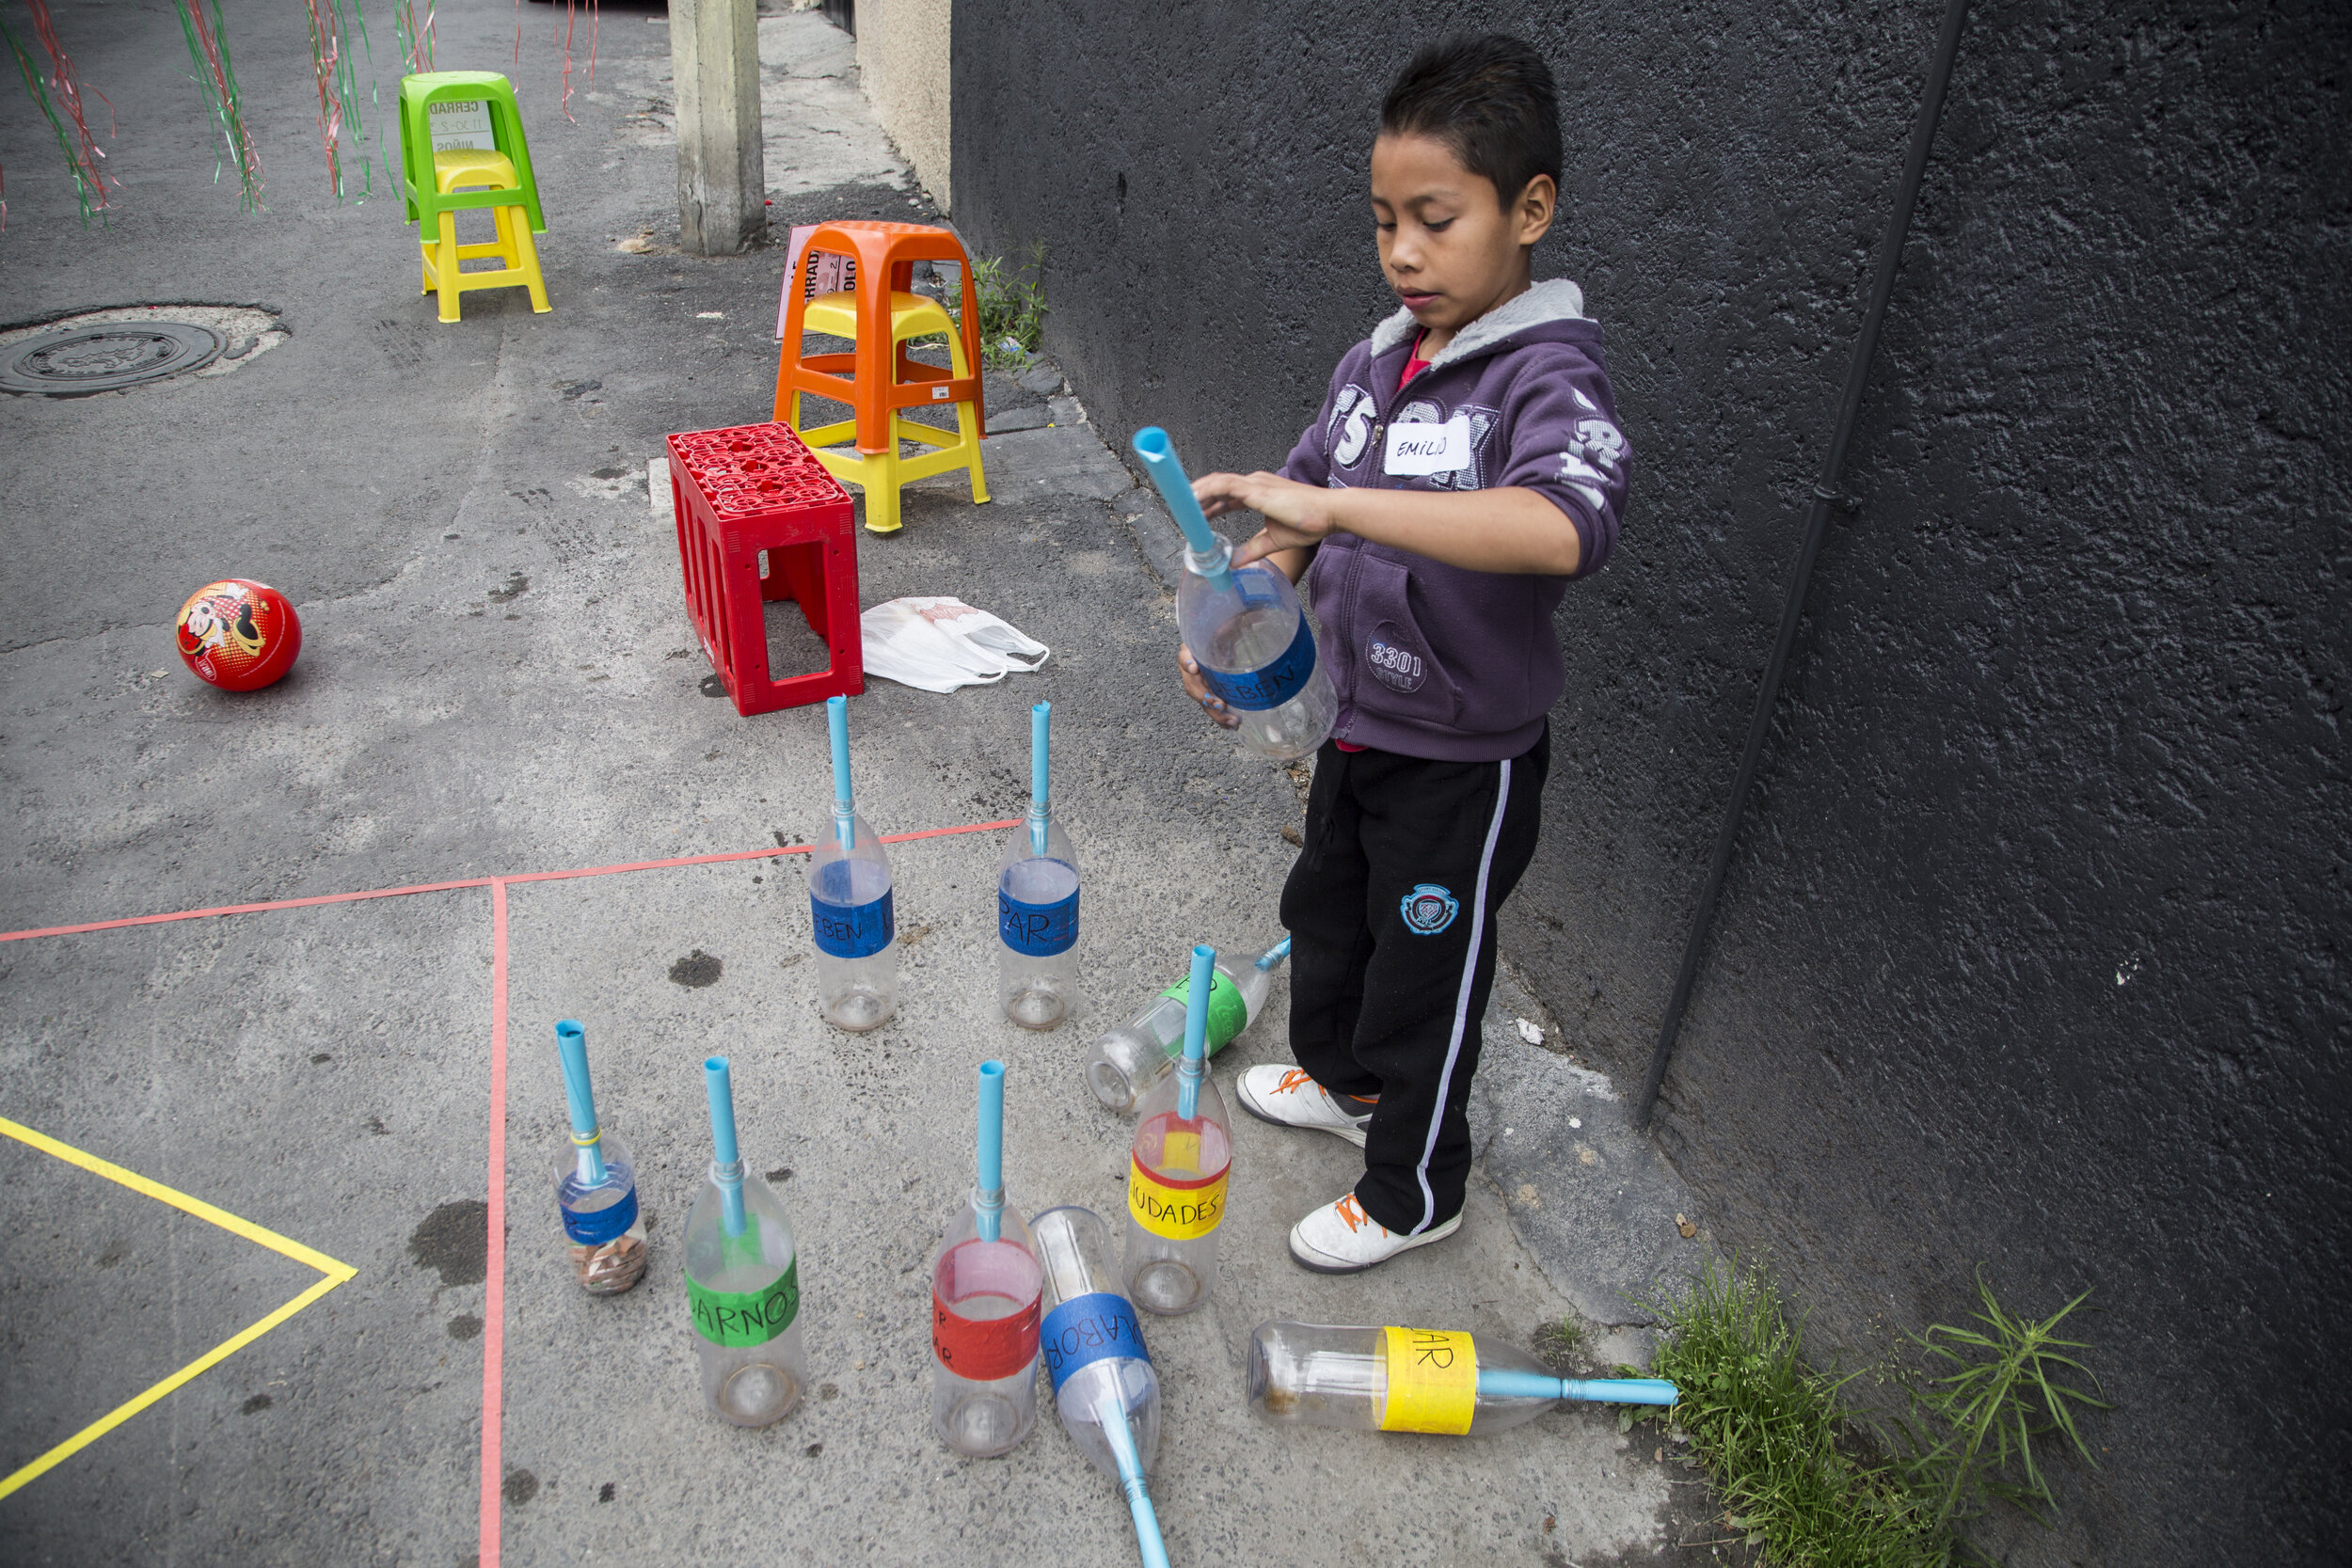  Urban policies have been unsuccessful in considering children’s needs and perspectives, nor have they integrated them in the urban planning process. Children, then, must adapt to existing urban conditions whether or not they are appropriate. Mexico 